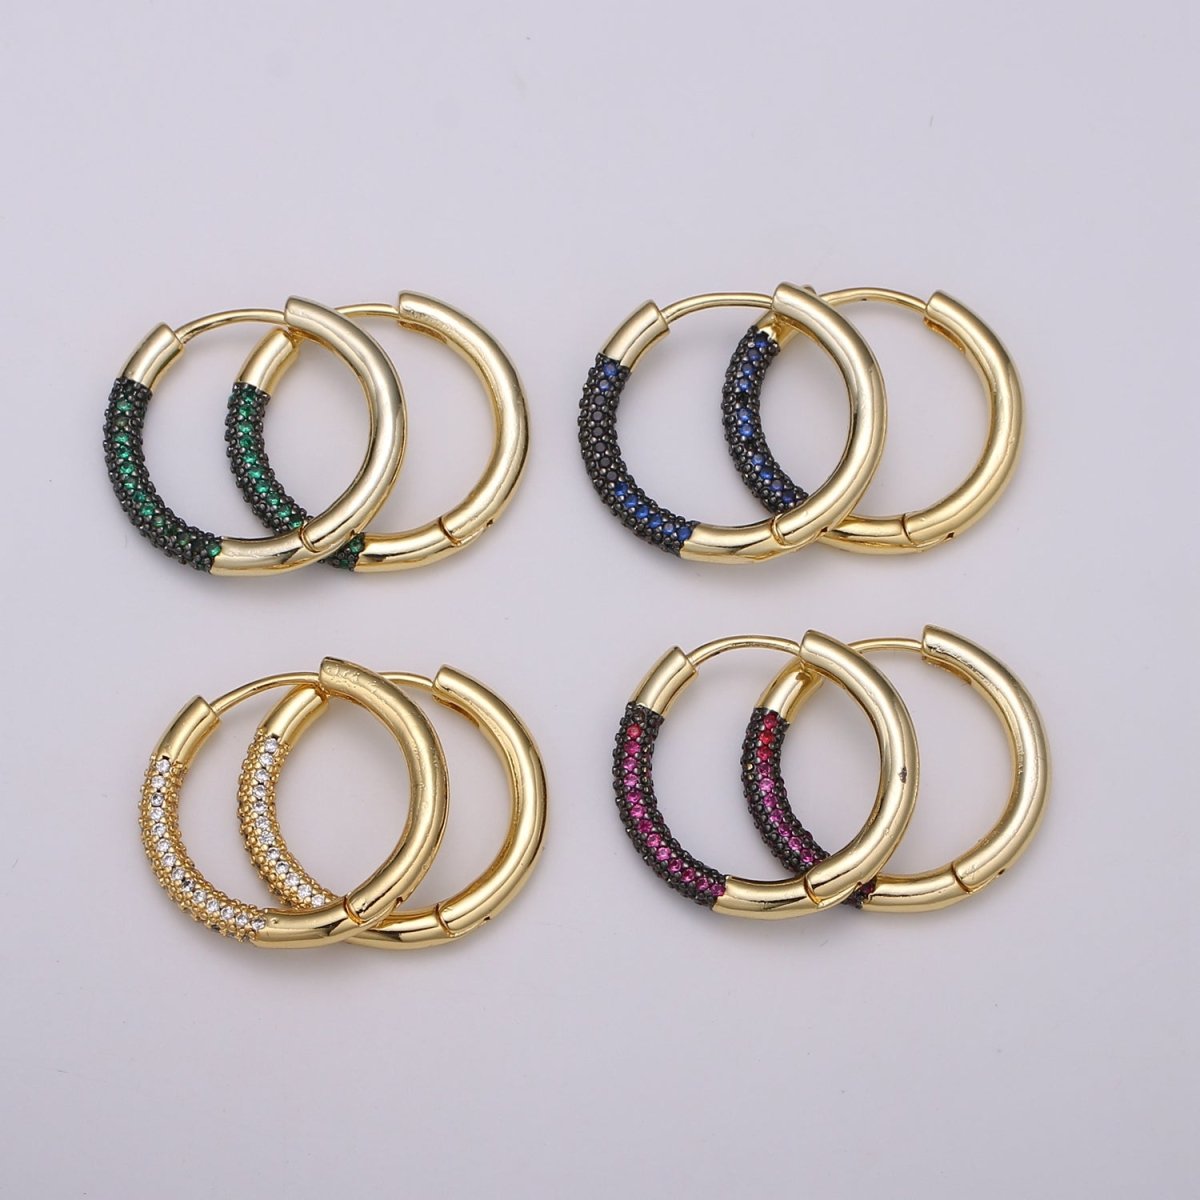 24k Gold Filled Earring Colorful CZ Pave Gold Hoop Earring, Blue, Clear, Green, Purple Hoop Earring for Everyday Wear Q-396 - Q-403 - DLUXCA